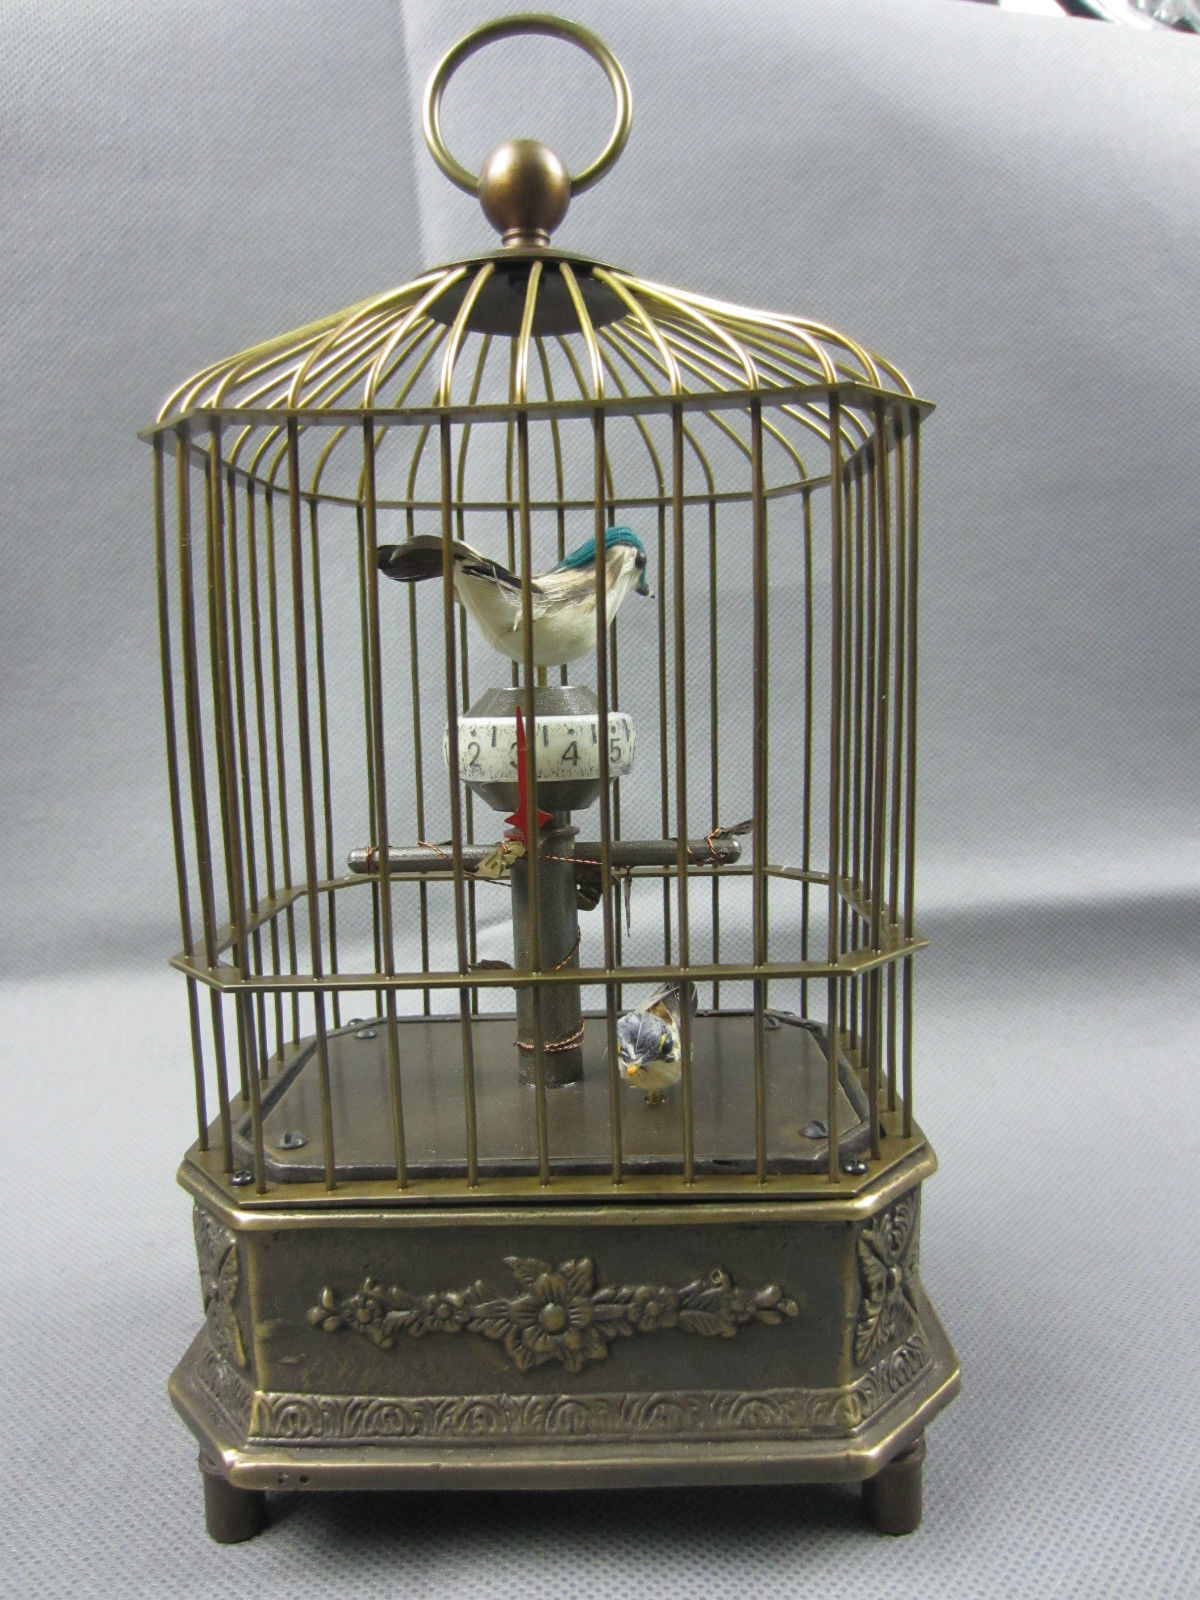 Collectible Decorated Old Handwork Copper The bird Mechanical Table Clock